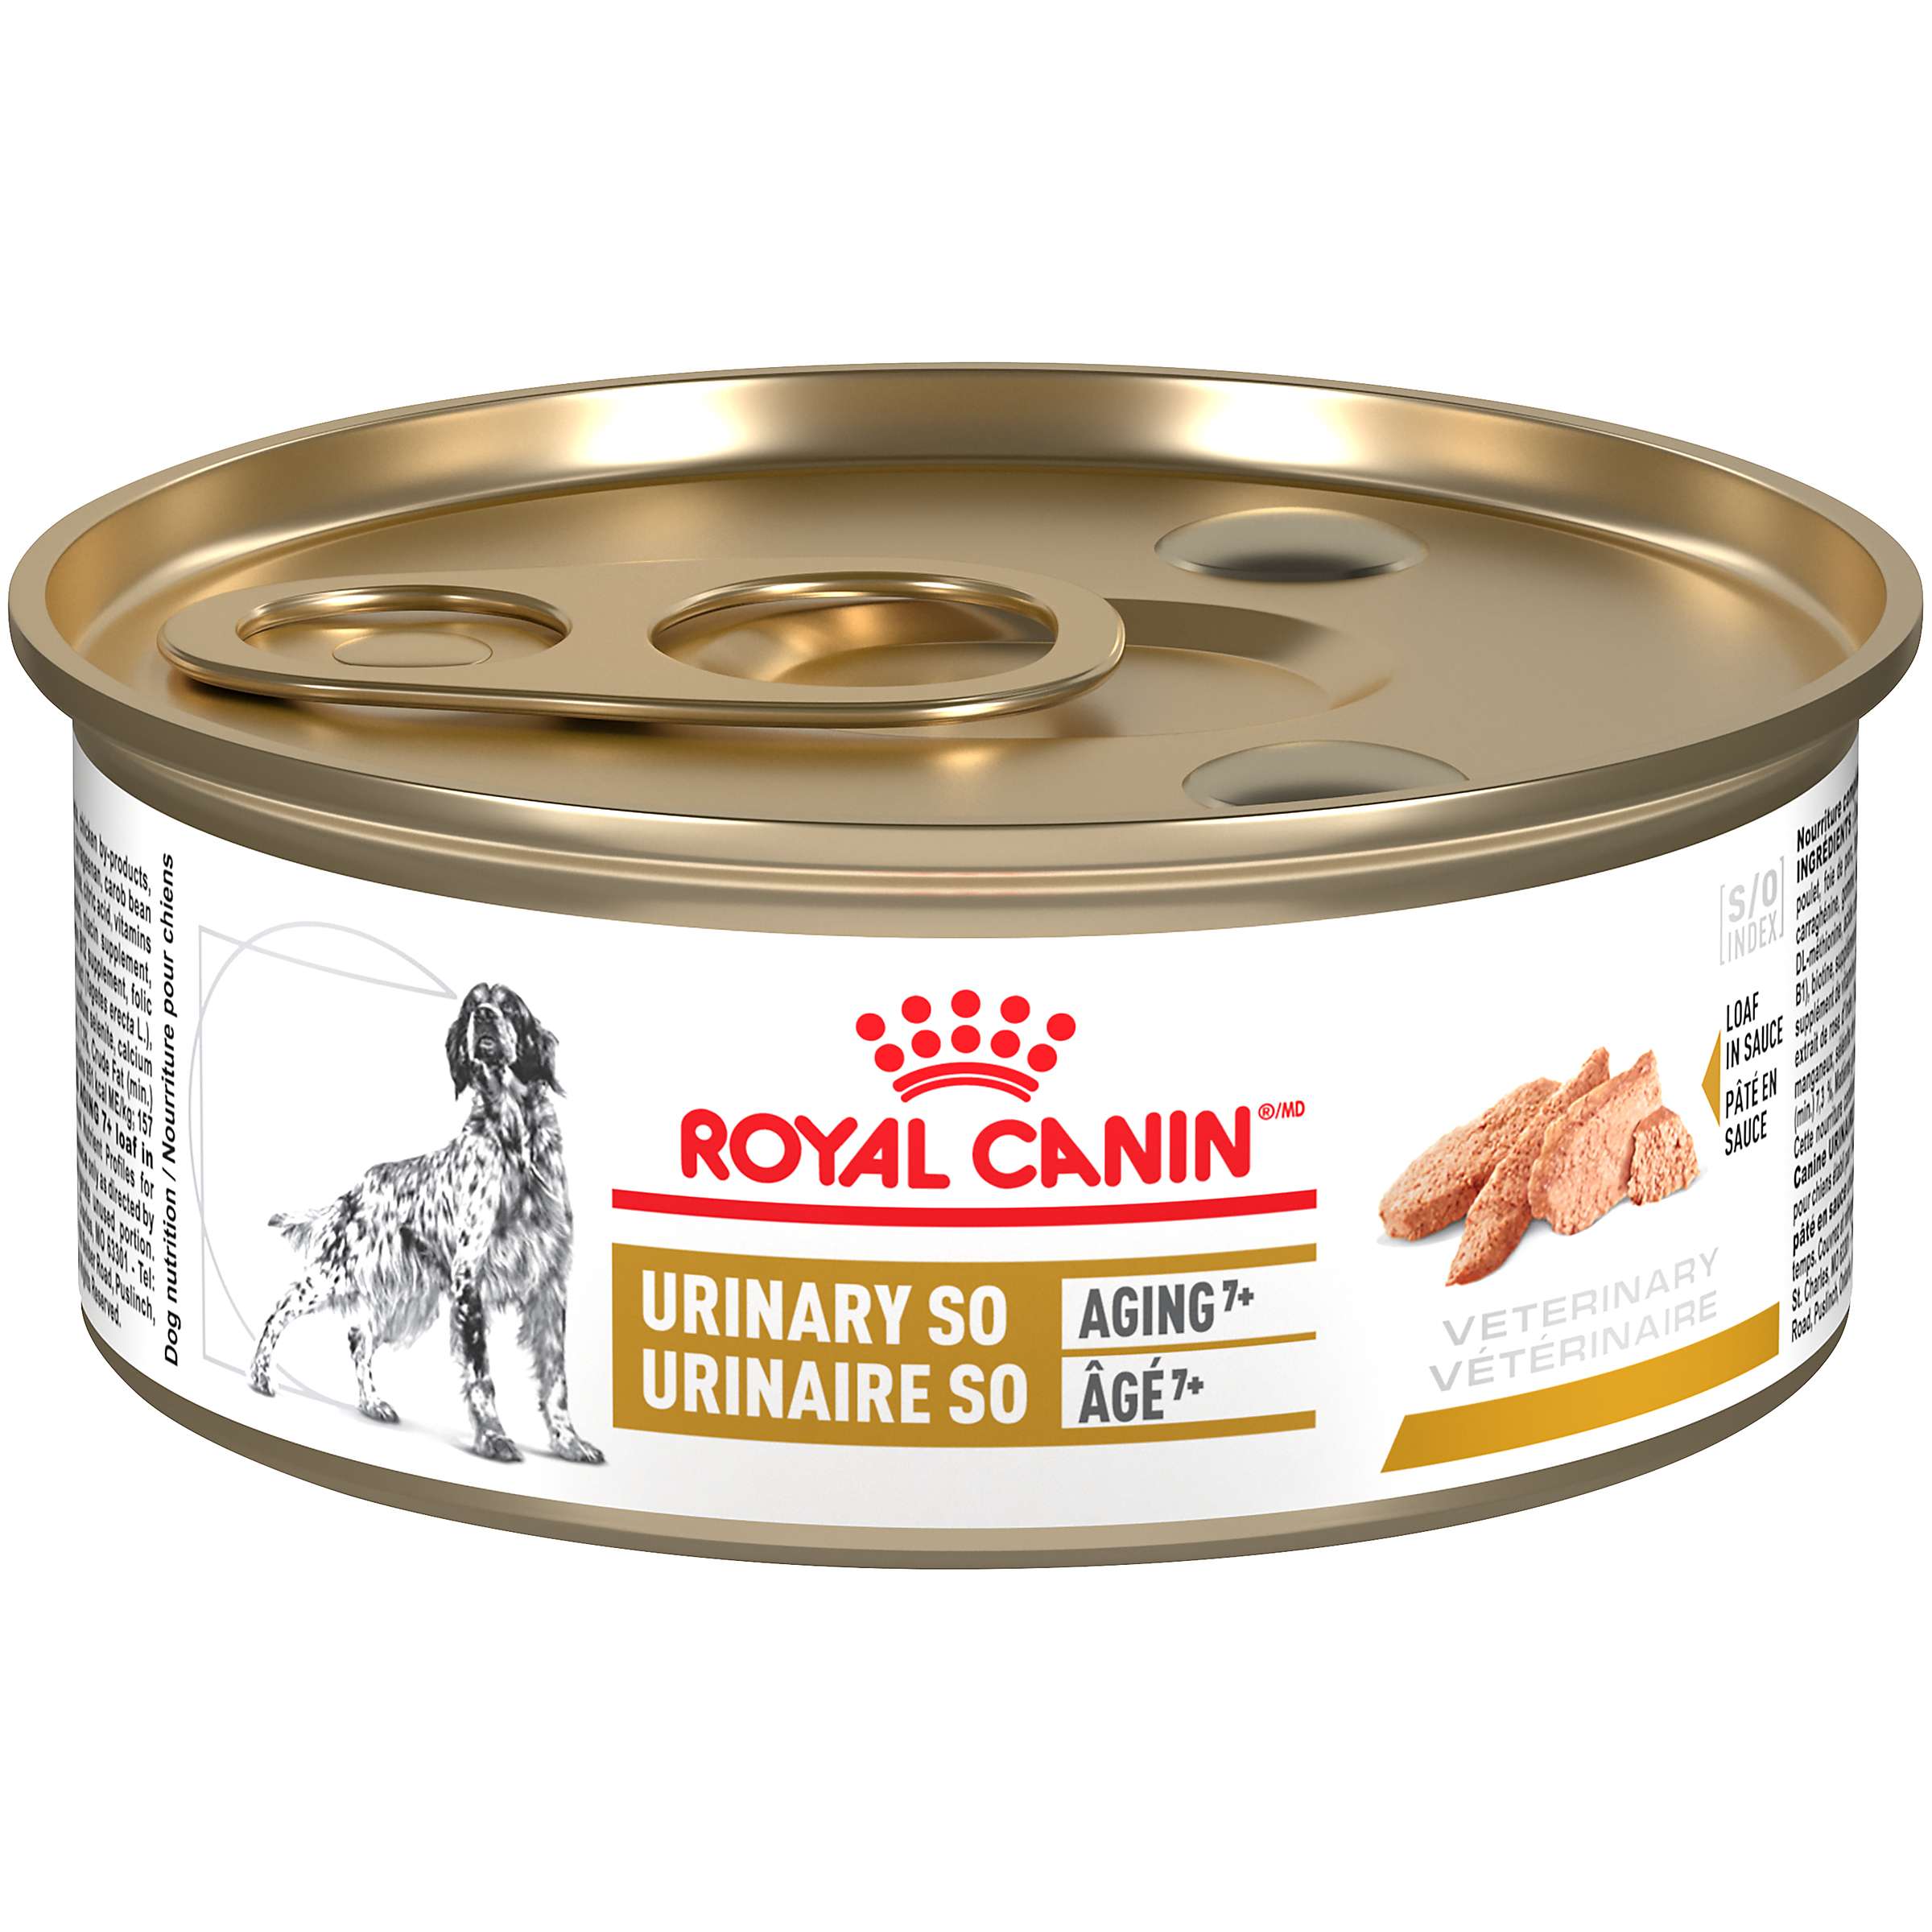 Canine Urinary SO® Aging 7+ Canned Dog Food